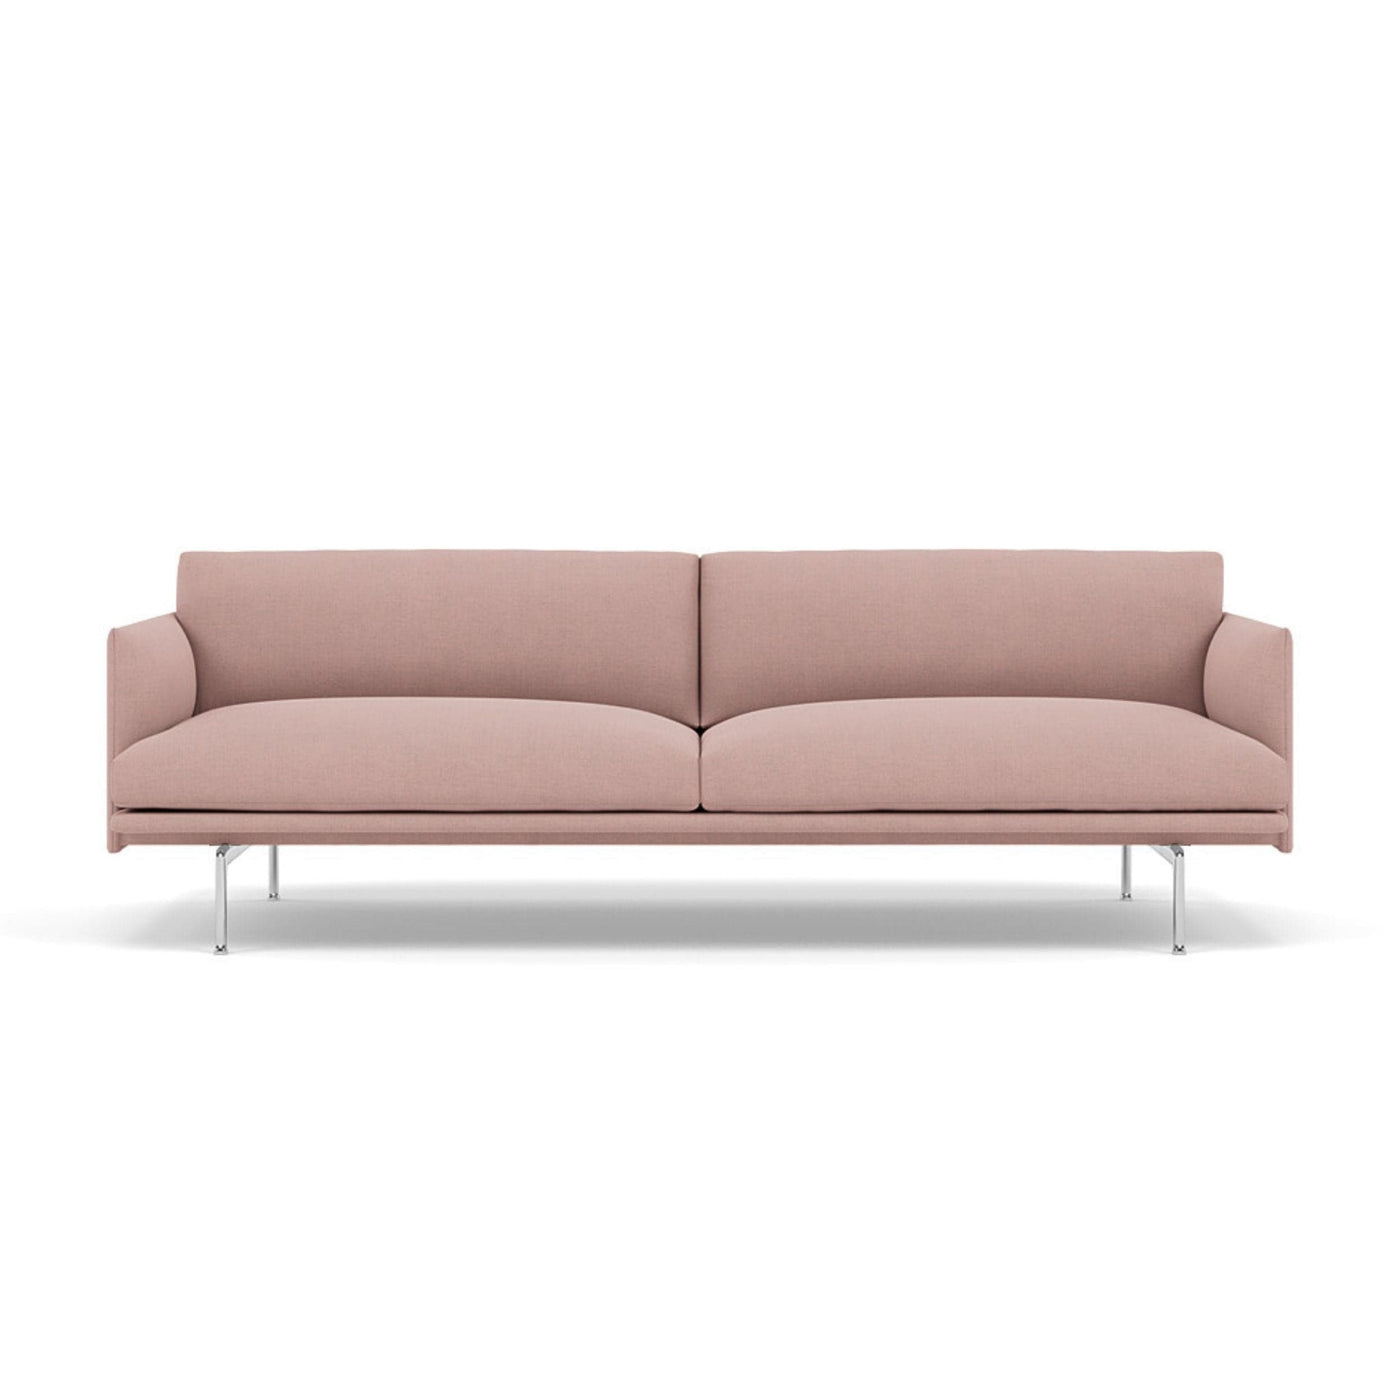 Muuto outline 3 seater sofa with polished aluminium legs. Made to order from someday designs. #colour_fiord-551